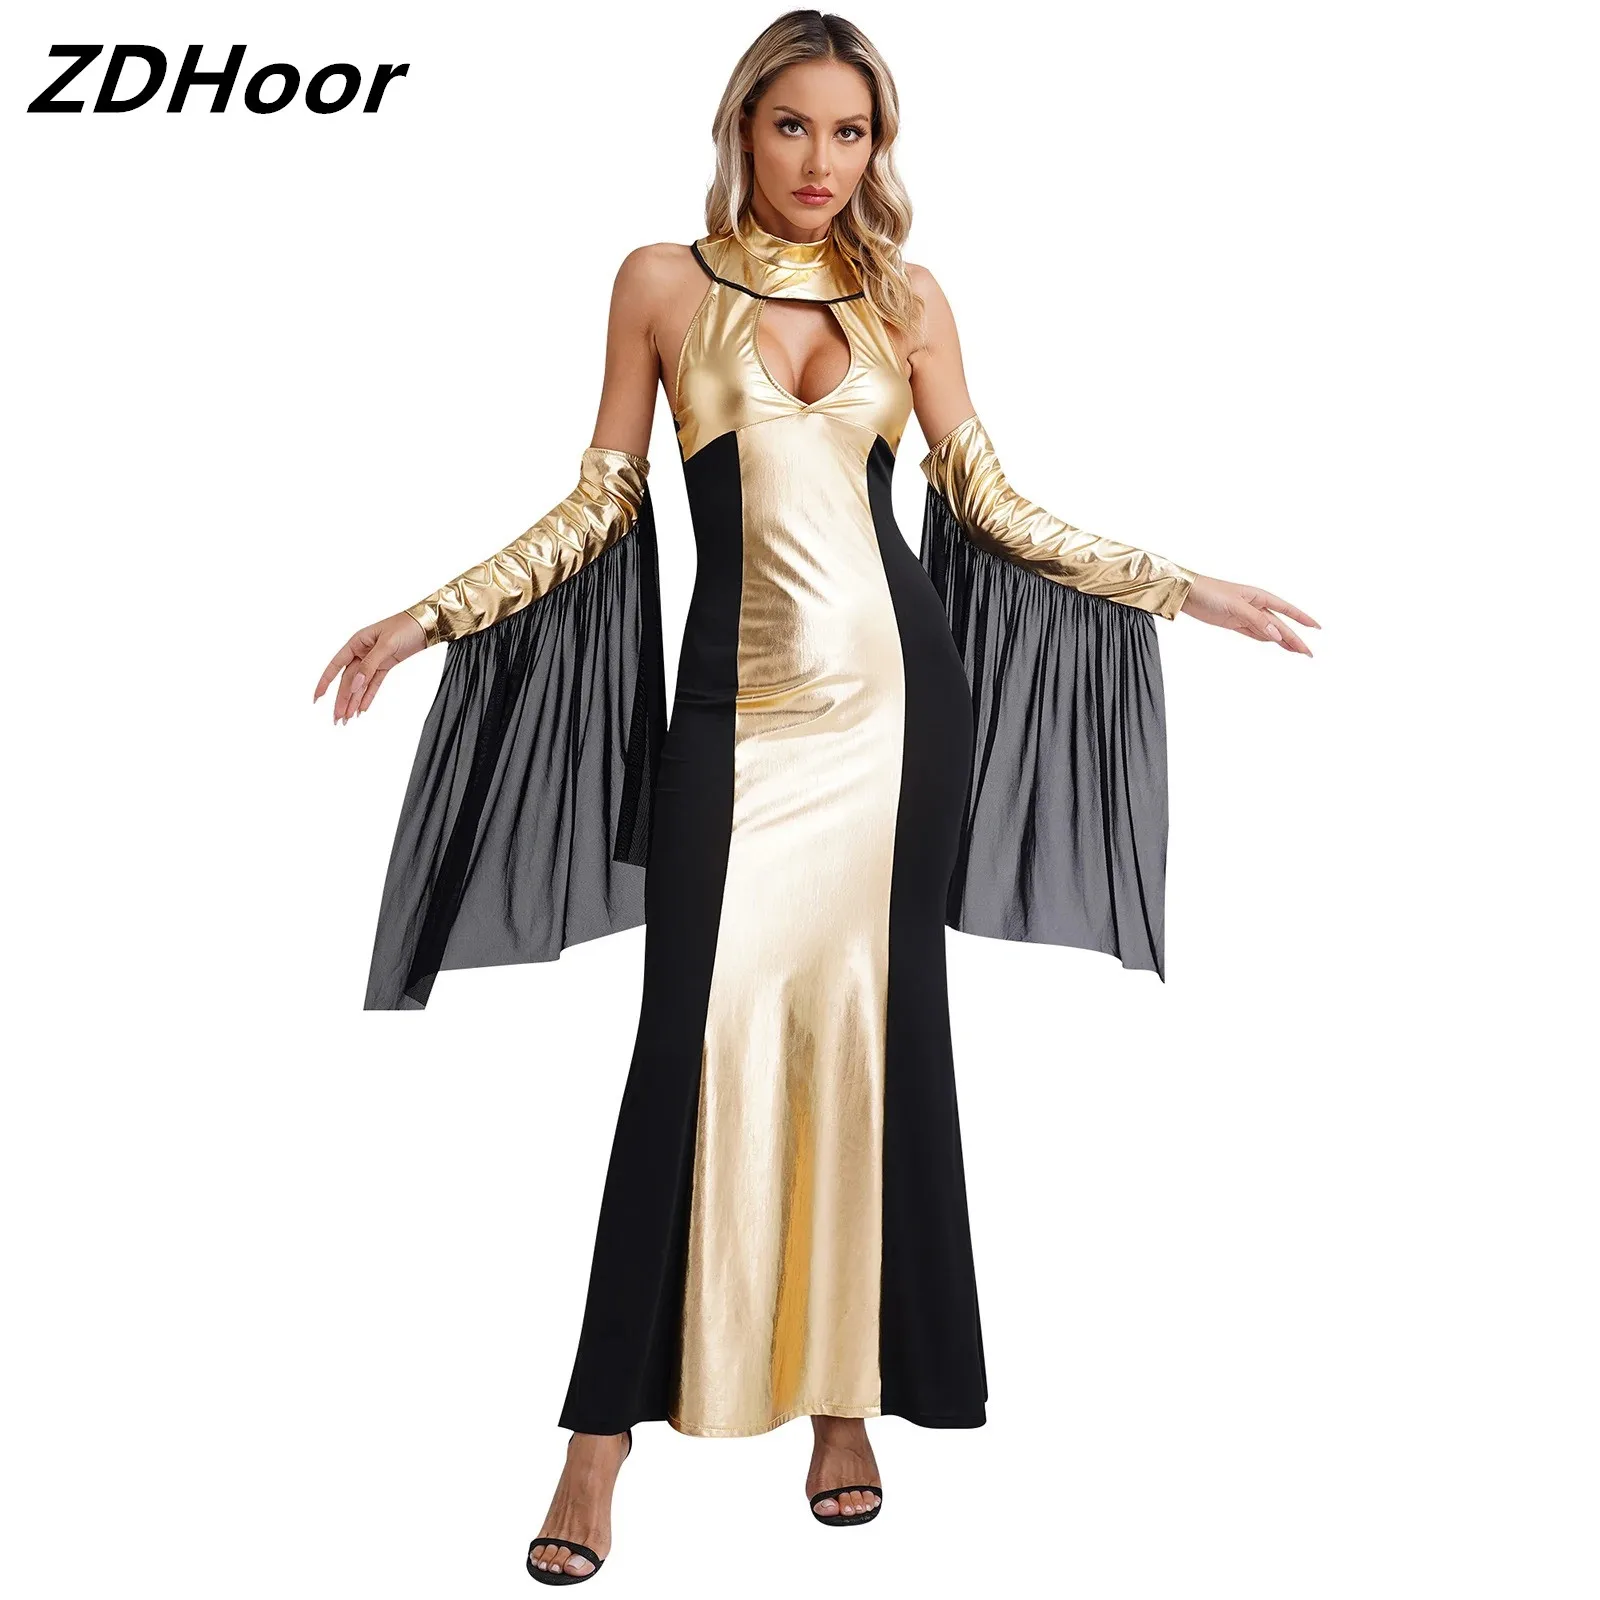 

Womens Egypt Queen Dress Halloween Costumes Halter Backless Keyhole Dress with Detachable Sleeves Cleopatra Cosplay